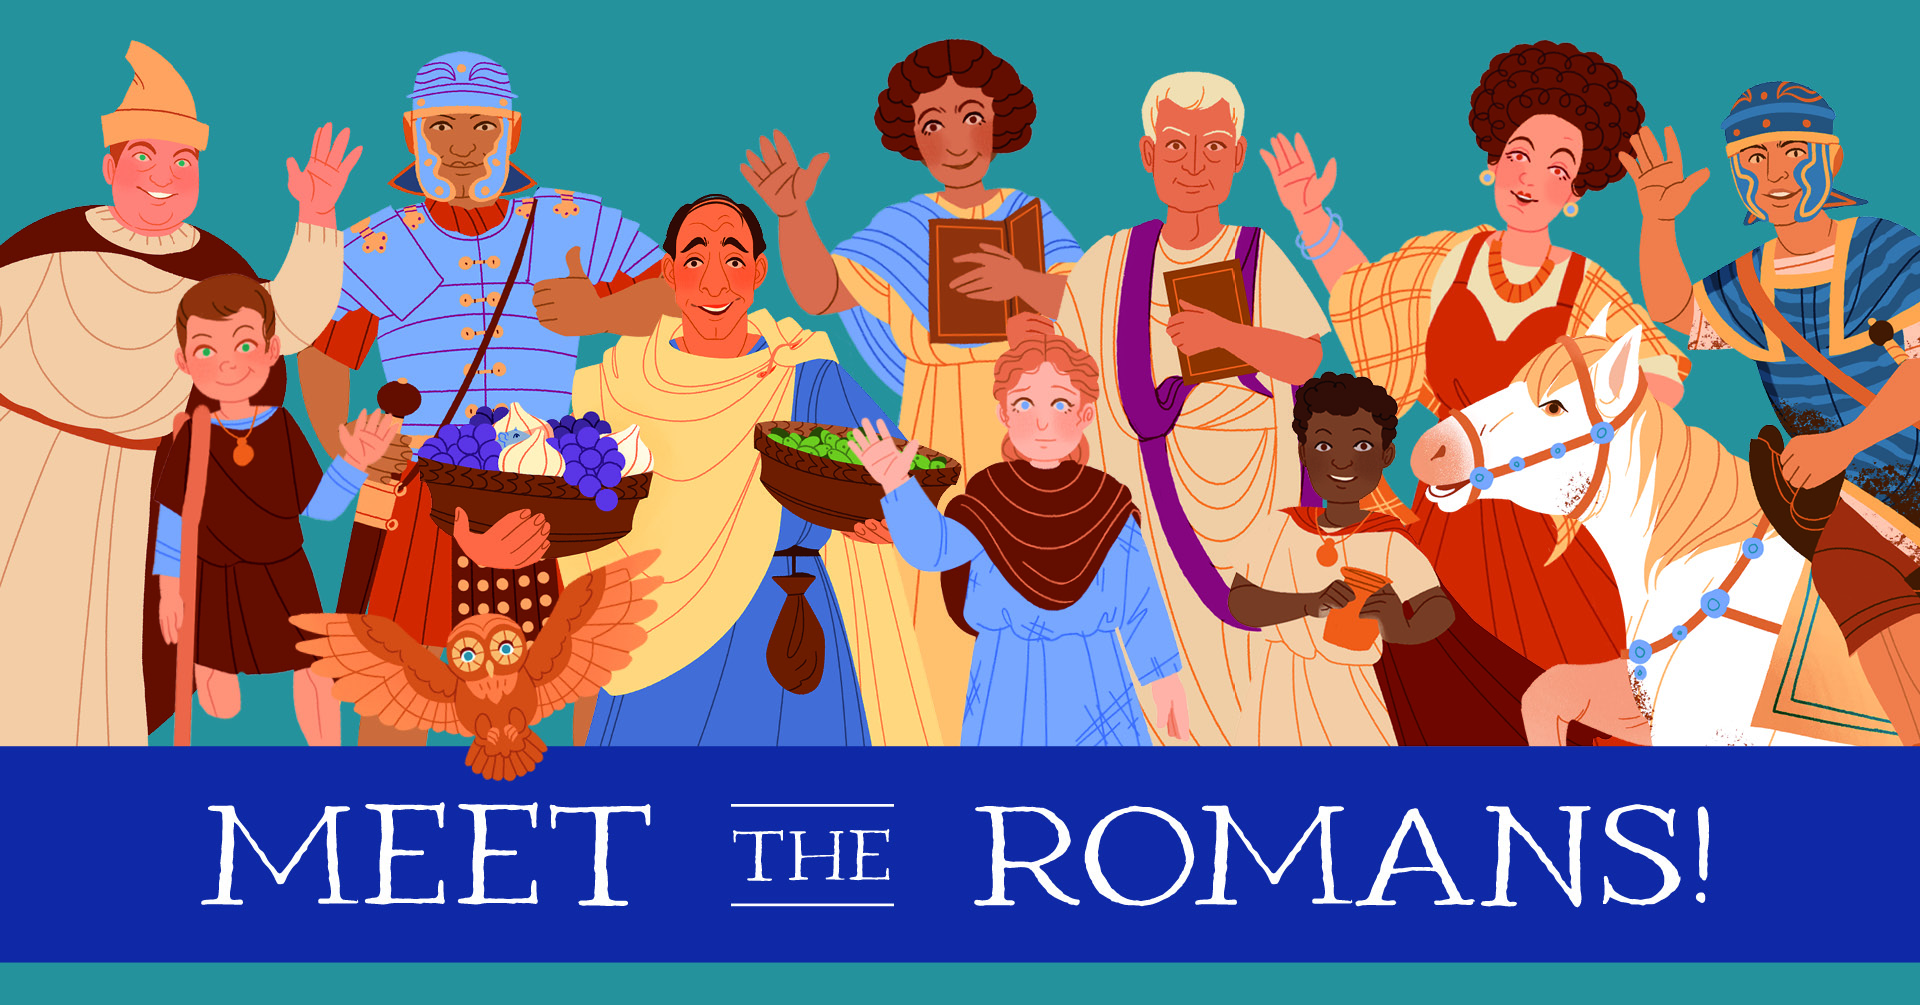 Image: A group of Roman characters